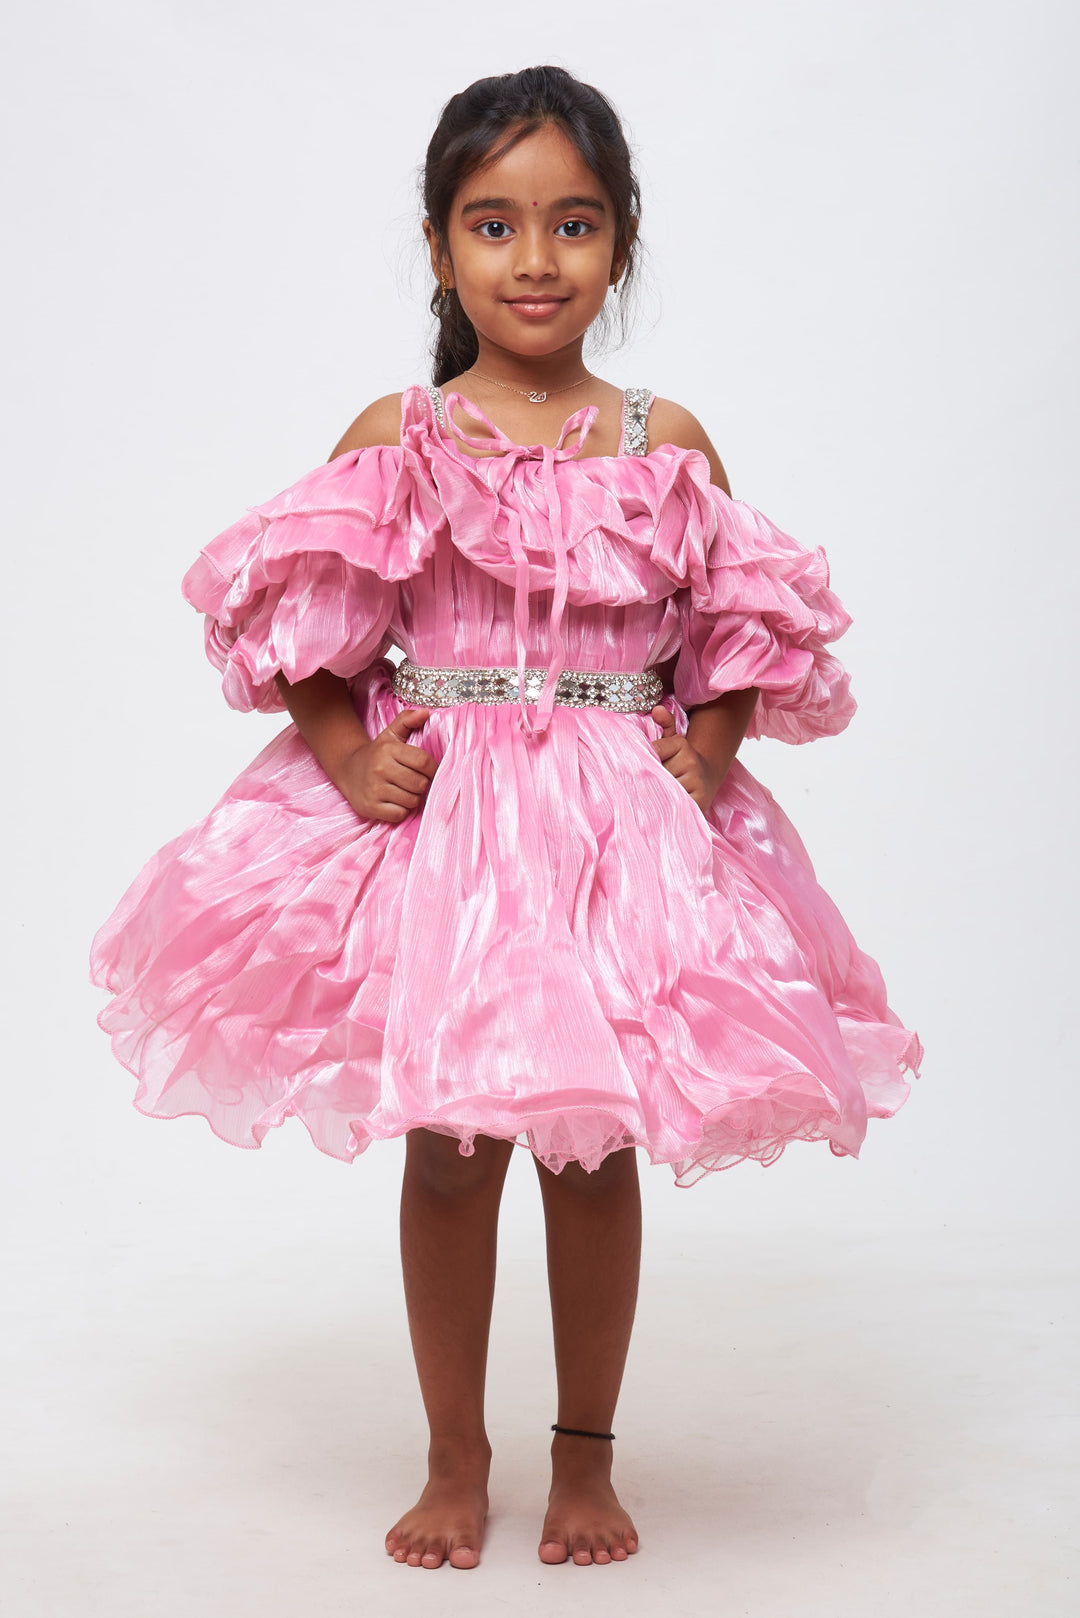 The Nesavu Girls Fancy Party Frock Blush Dream: Girls Organza Ruffle Party Frock with Sparkling Embellishments Nesavu 16 (1Y) / Pink / Satin Organza PF154A-16 Enchanting Elegance | Girls' Party Frocks to Fall in Love With | The Nesavu